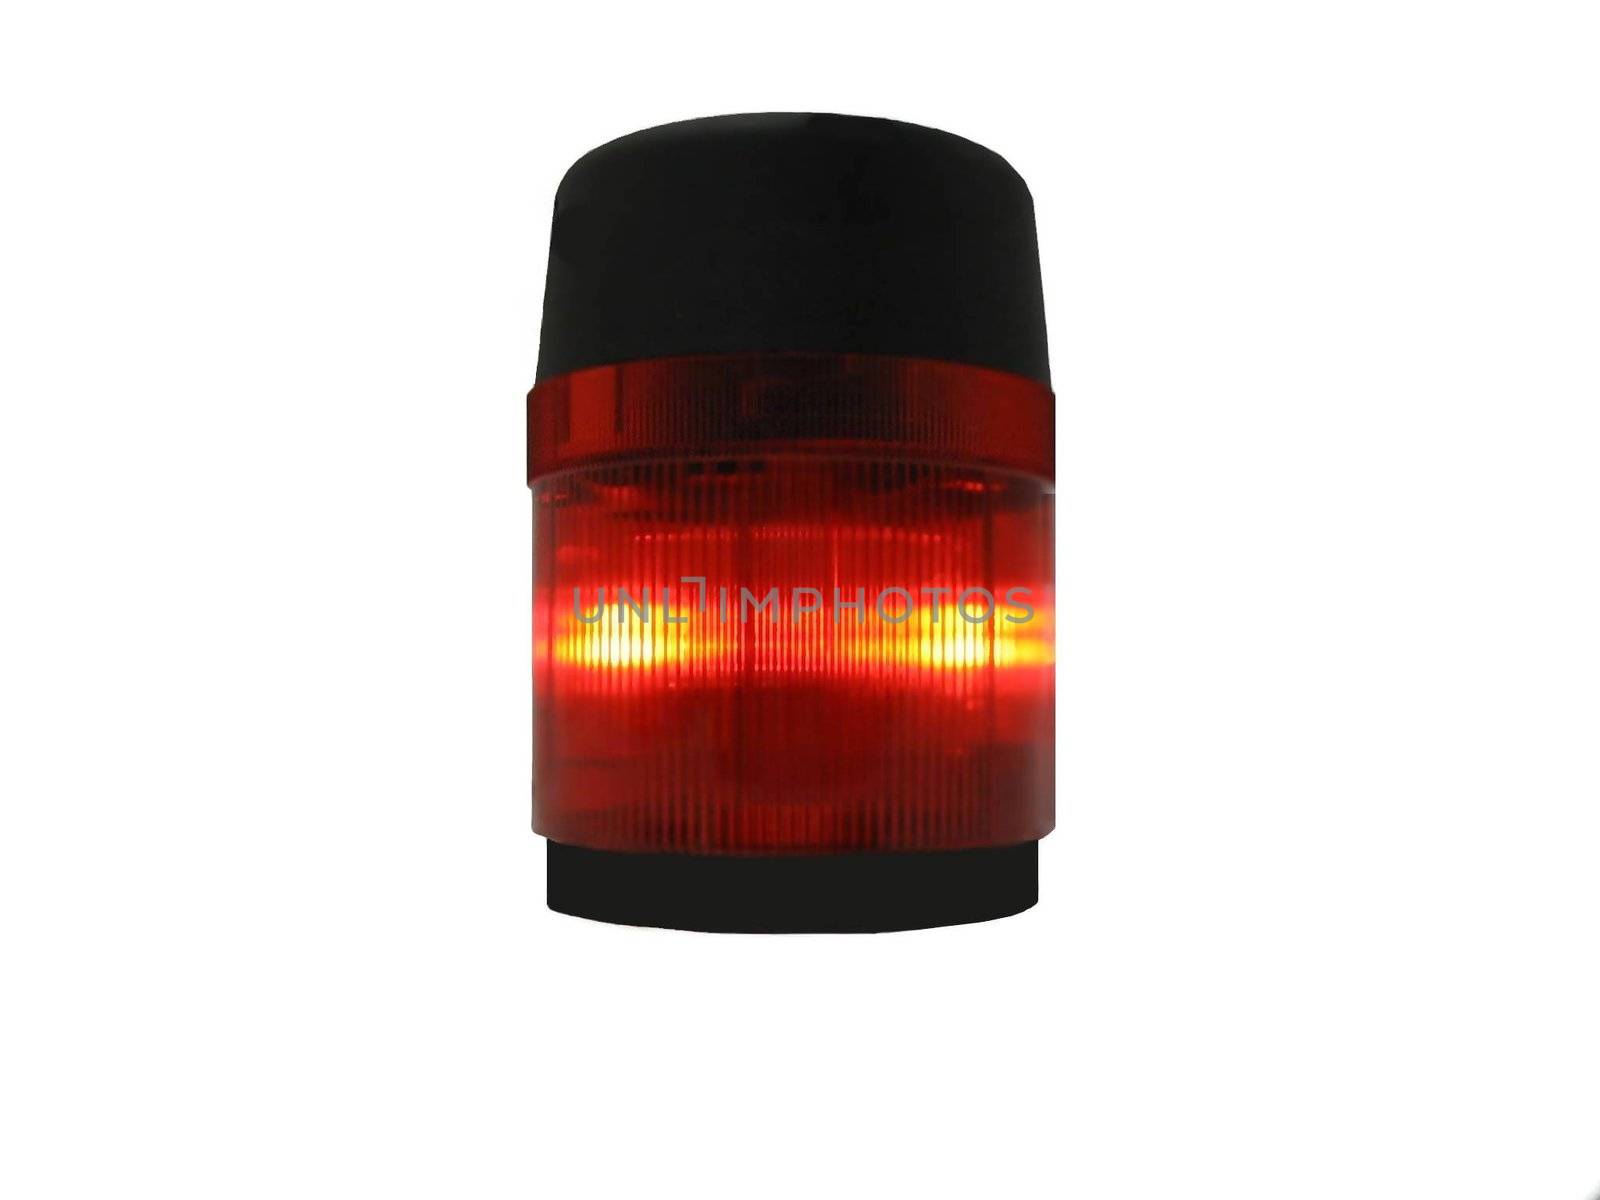 This is a flashing red emergency beacon isolated on white.